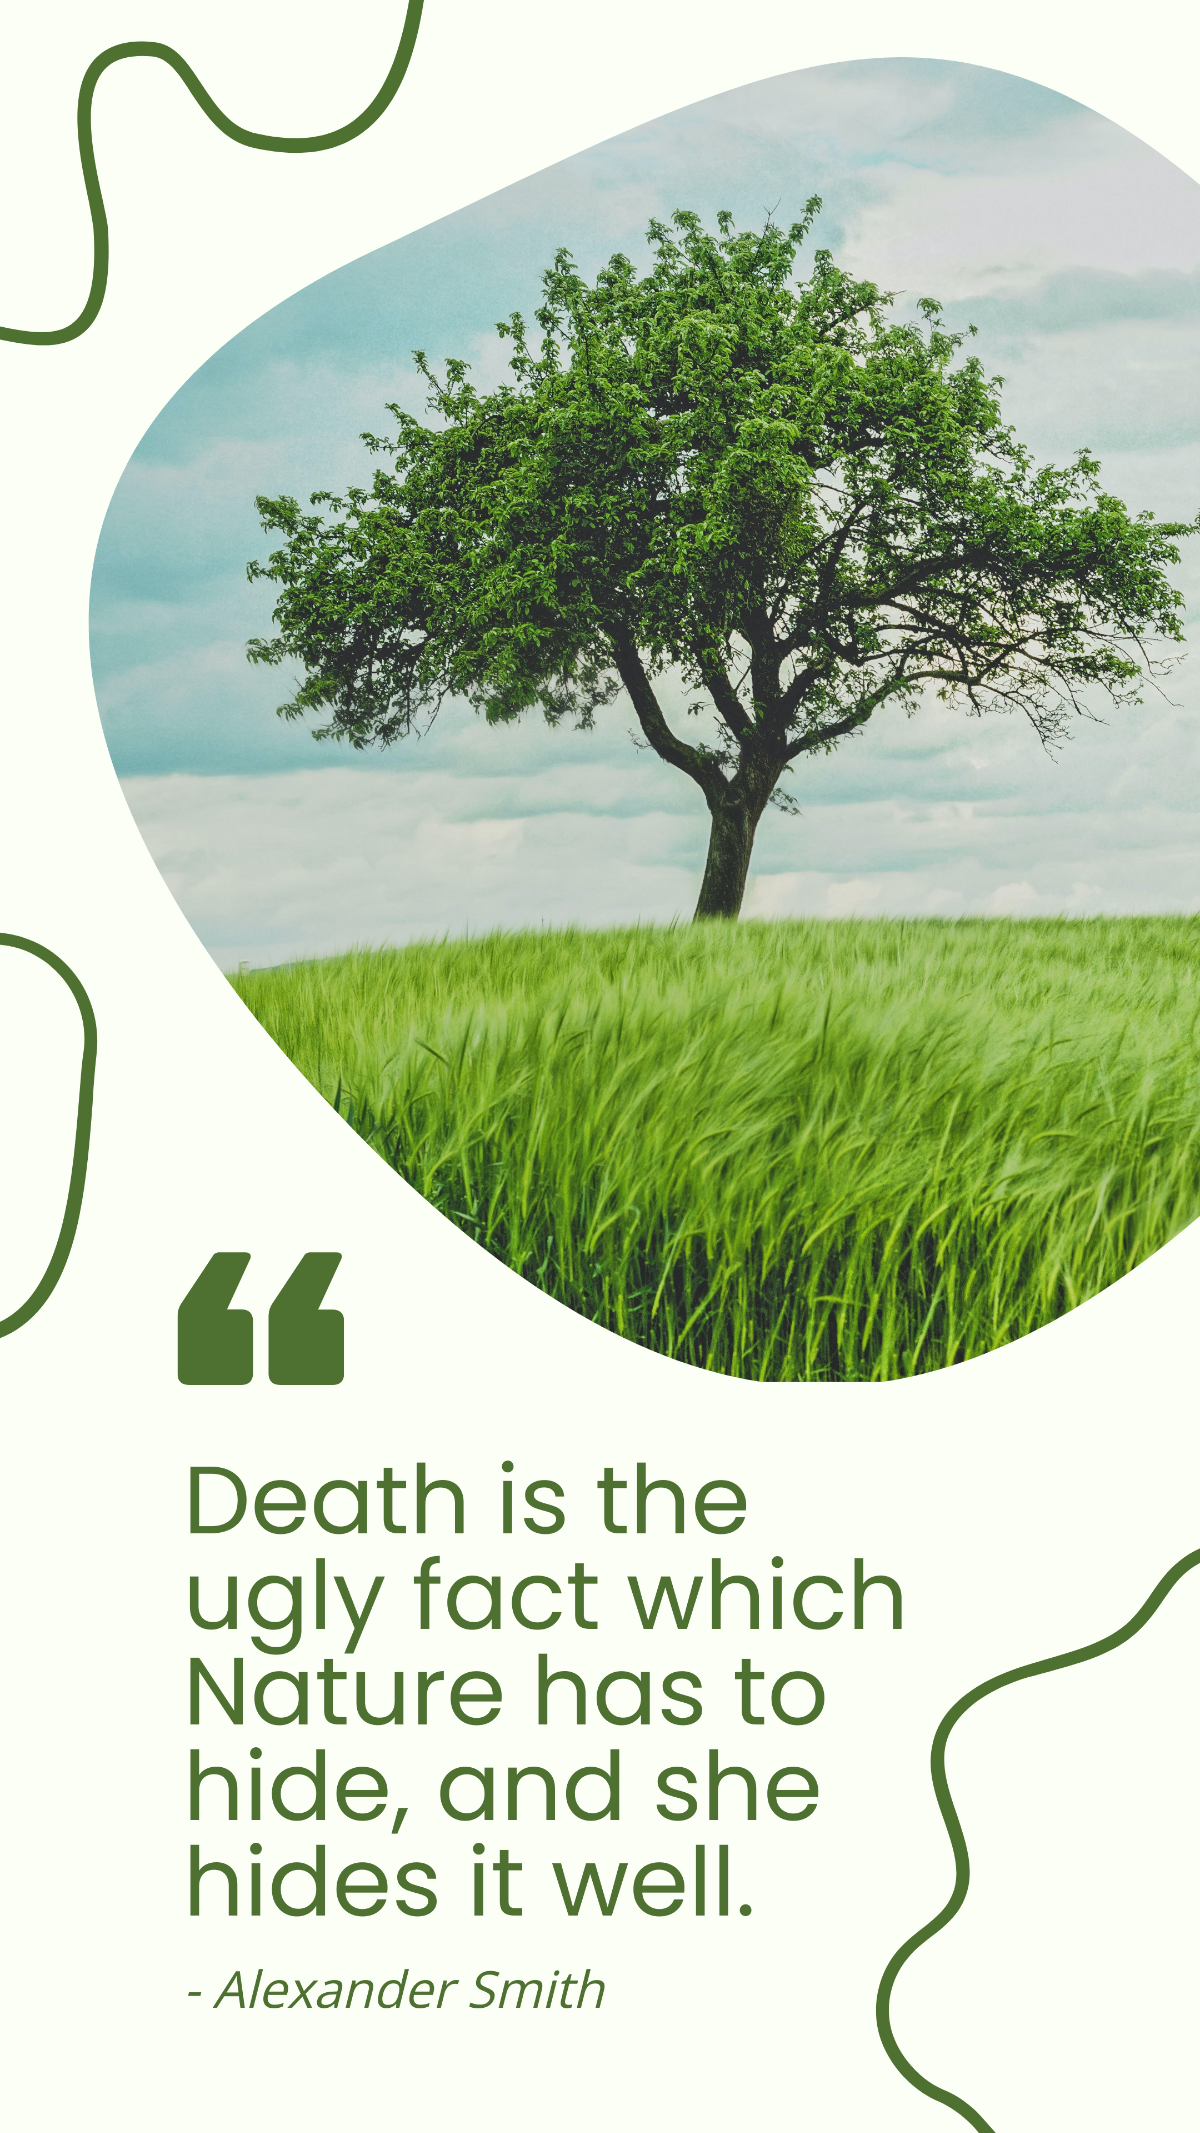 Free Alexander Smith - Death is the ugly fact which Nature has to hide, and she hides it well. Template